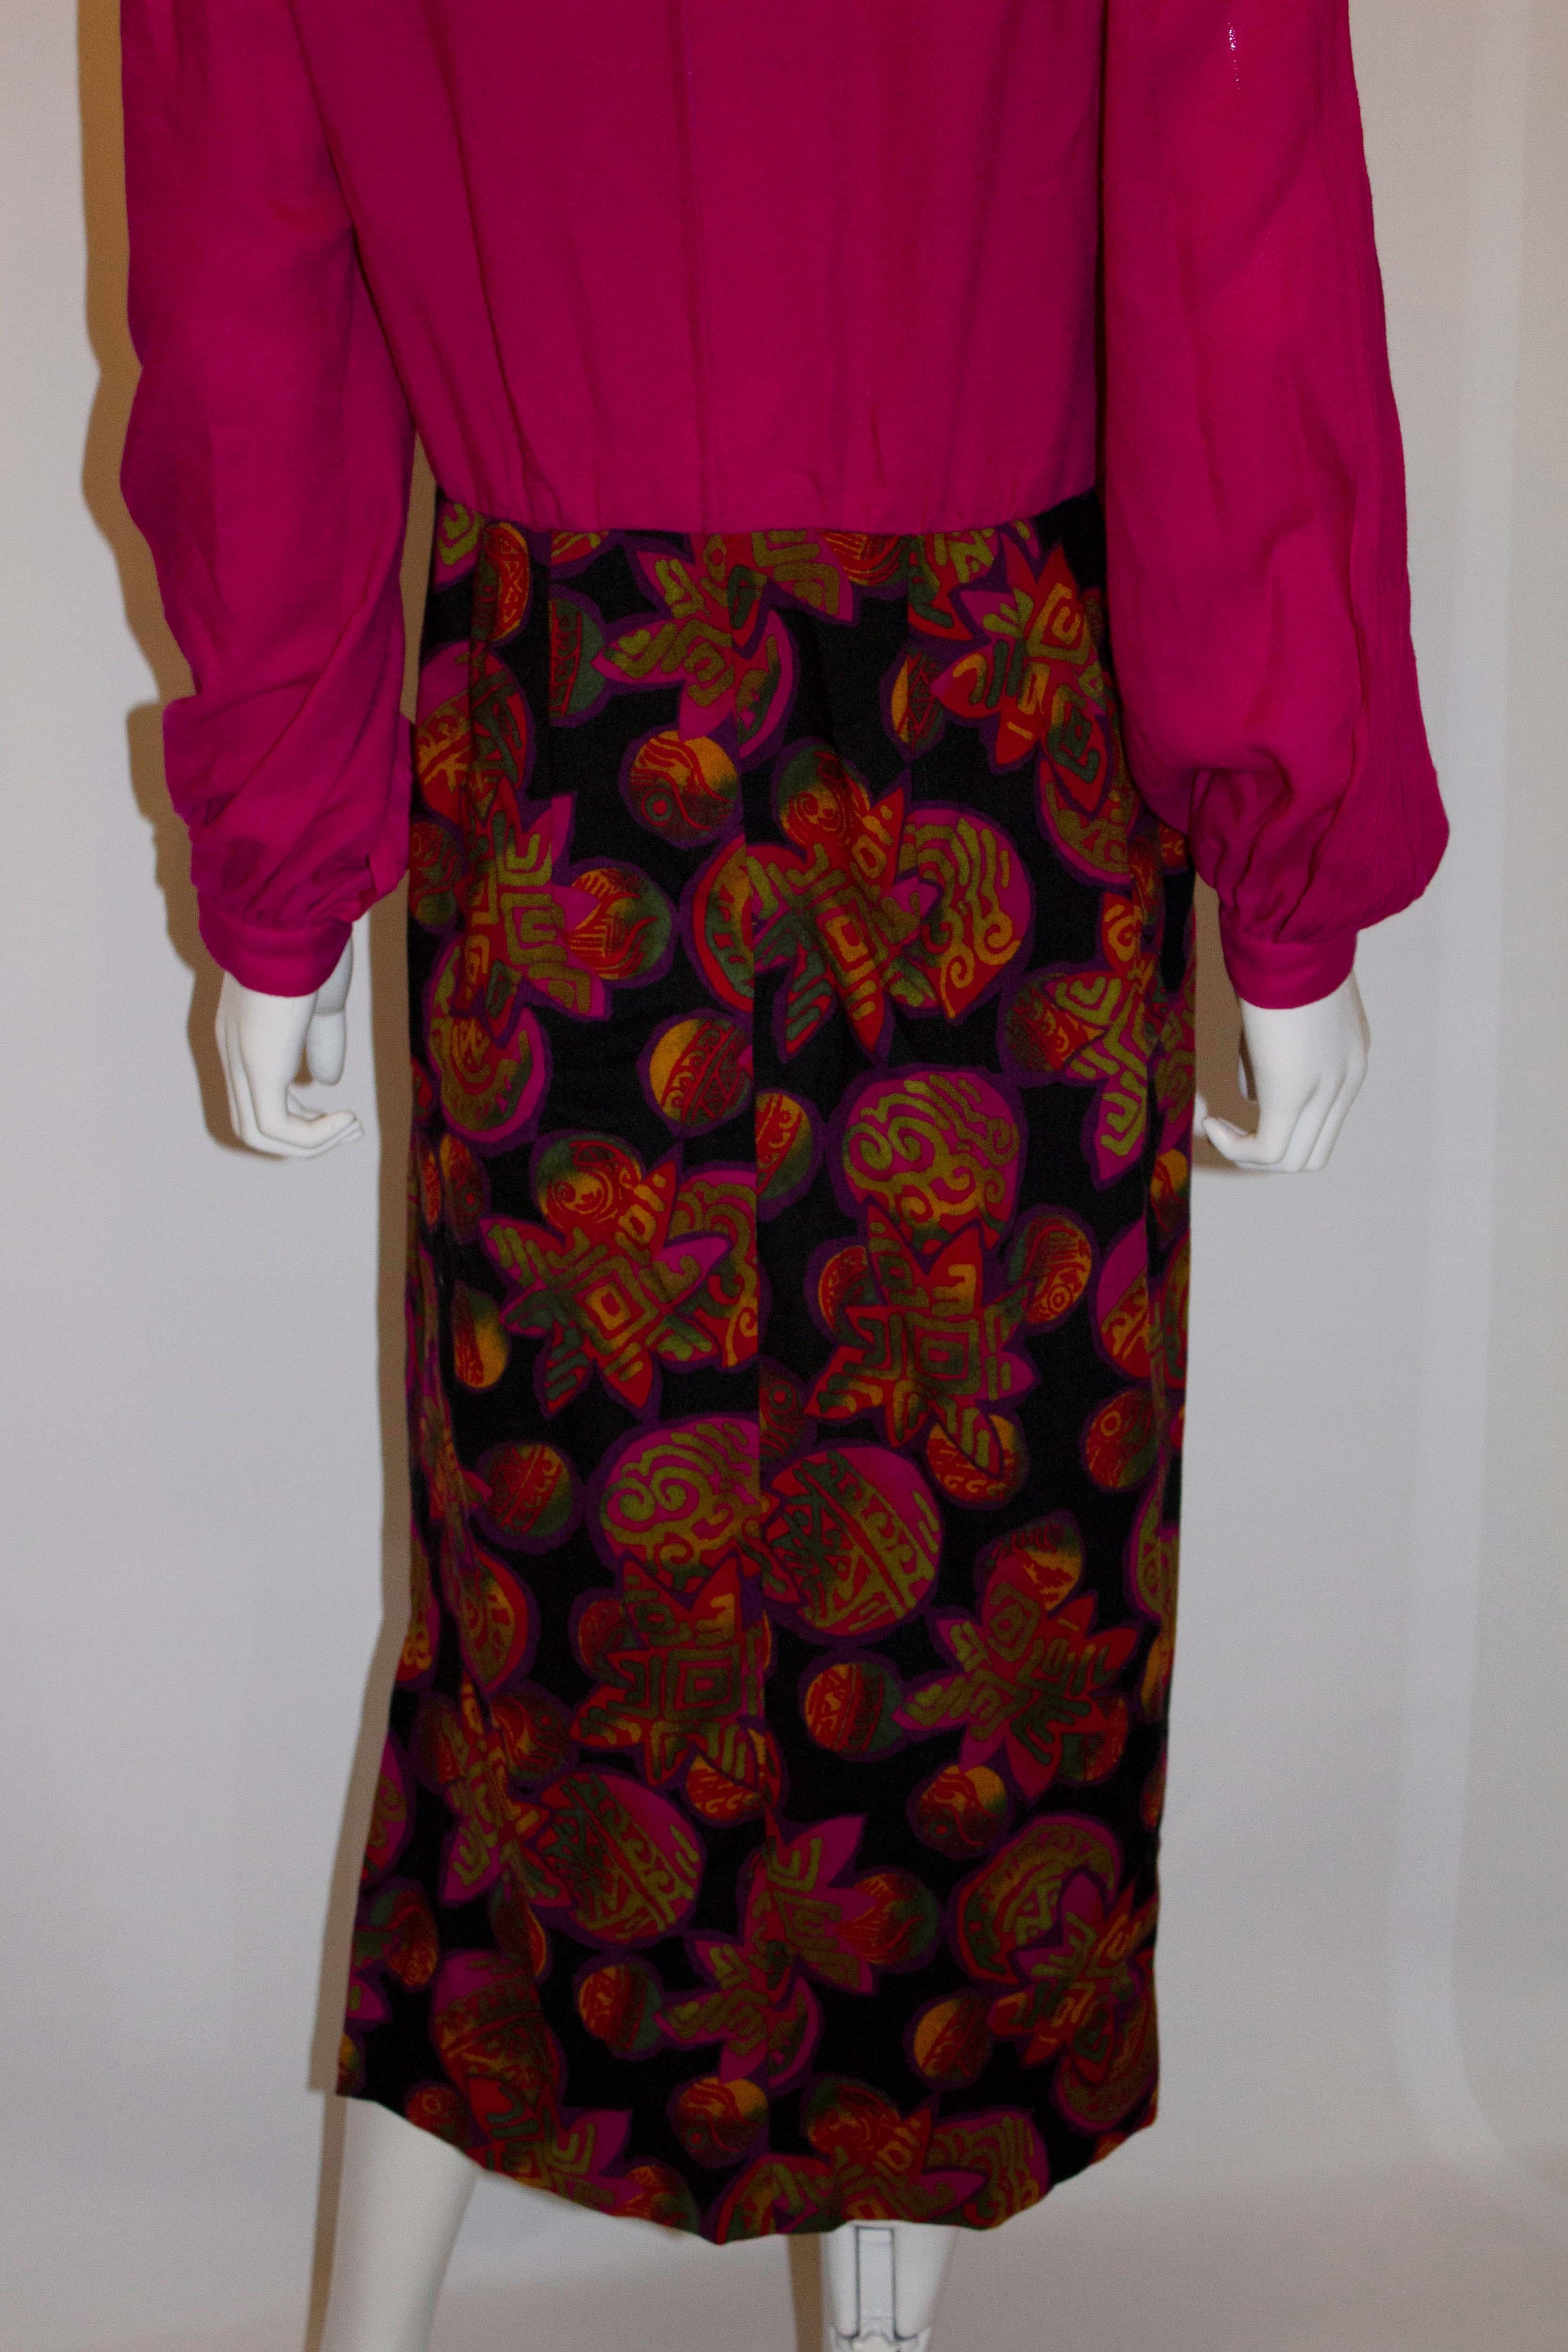 A pretty vintage wool crepe dress by Donald Campbell. The dress has a pink upper area with pintucks on the front and sleeves. The skirt area is in a print. The dress has a central back zip and is lined. Size 14, Measurements Bust up to 39'', waist